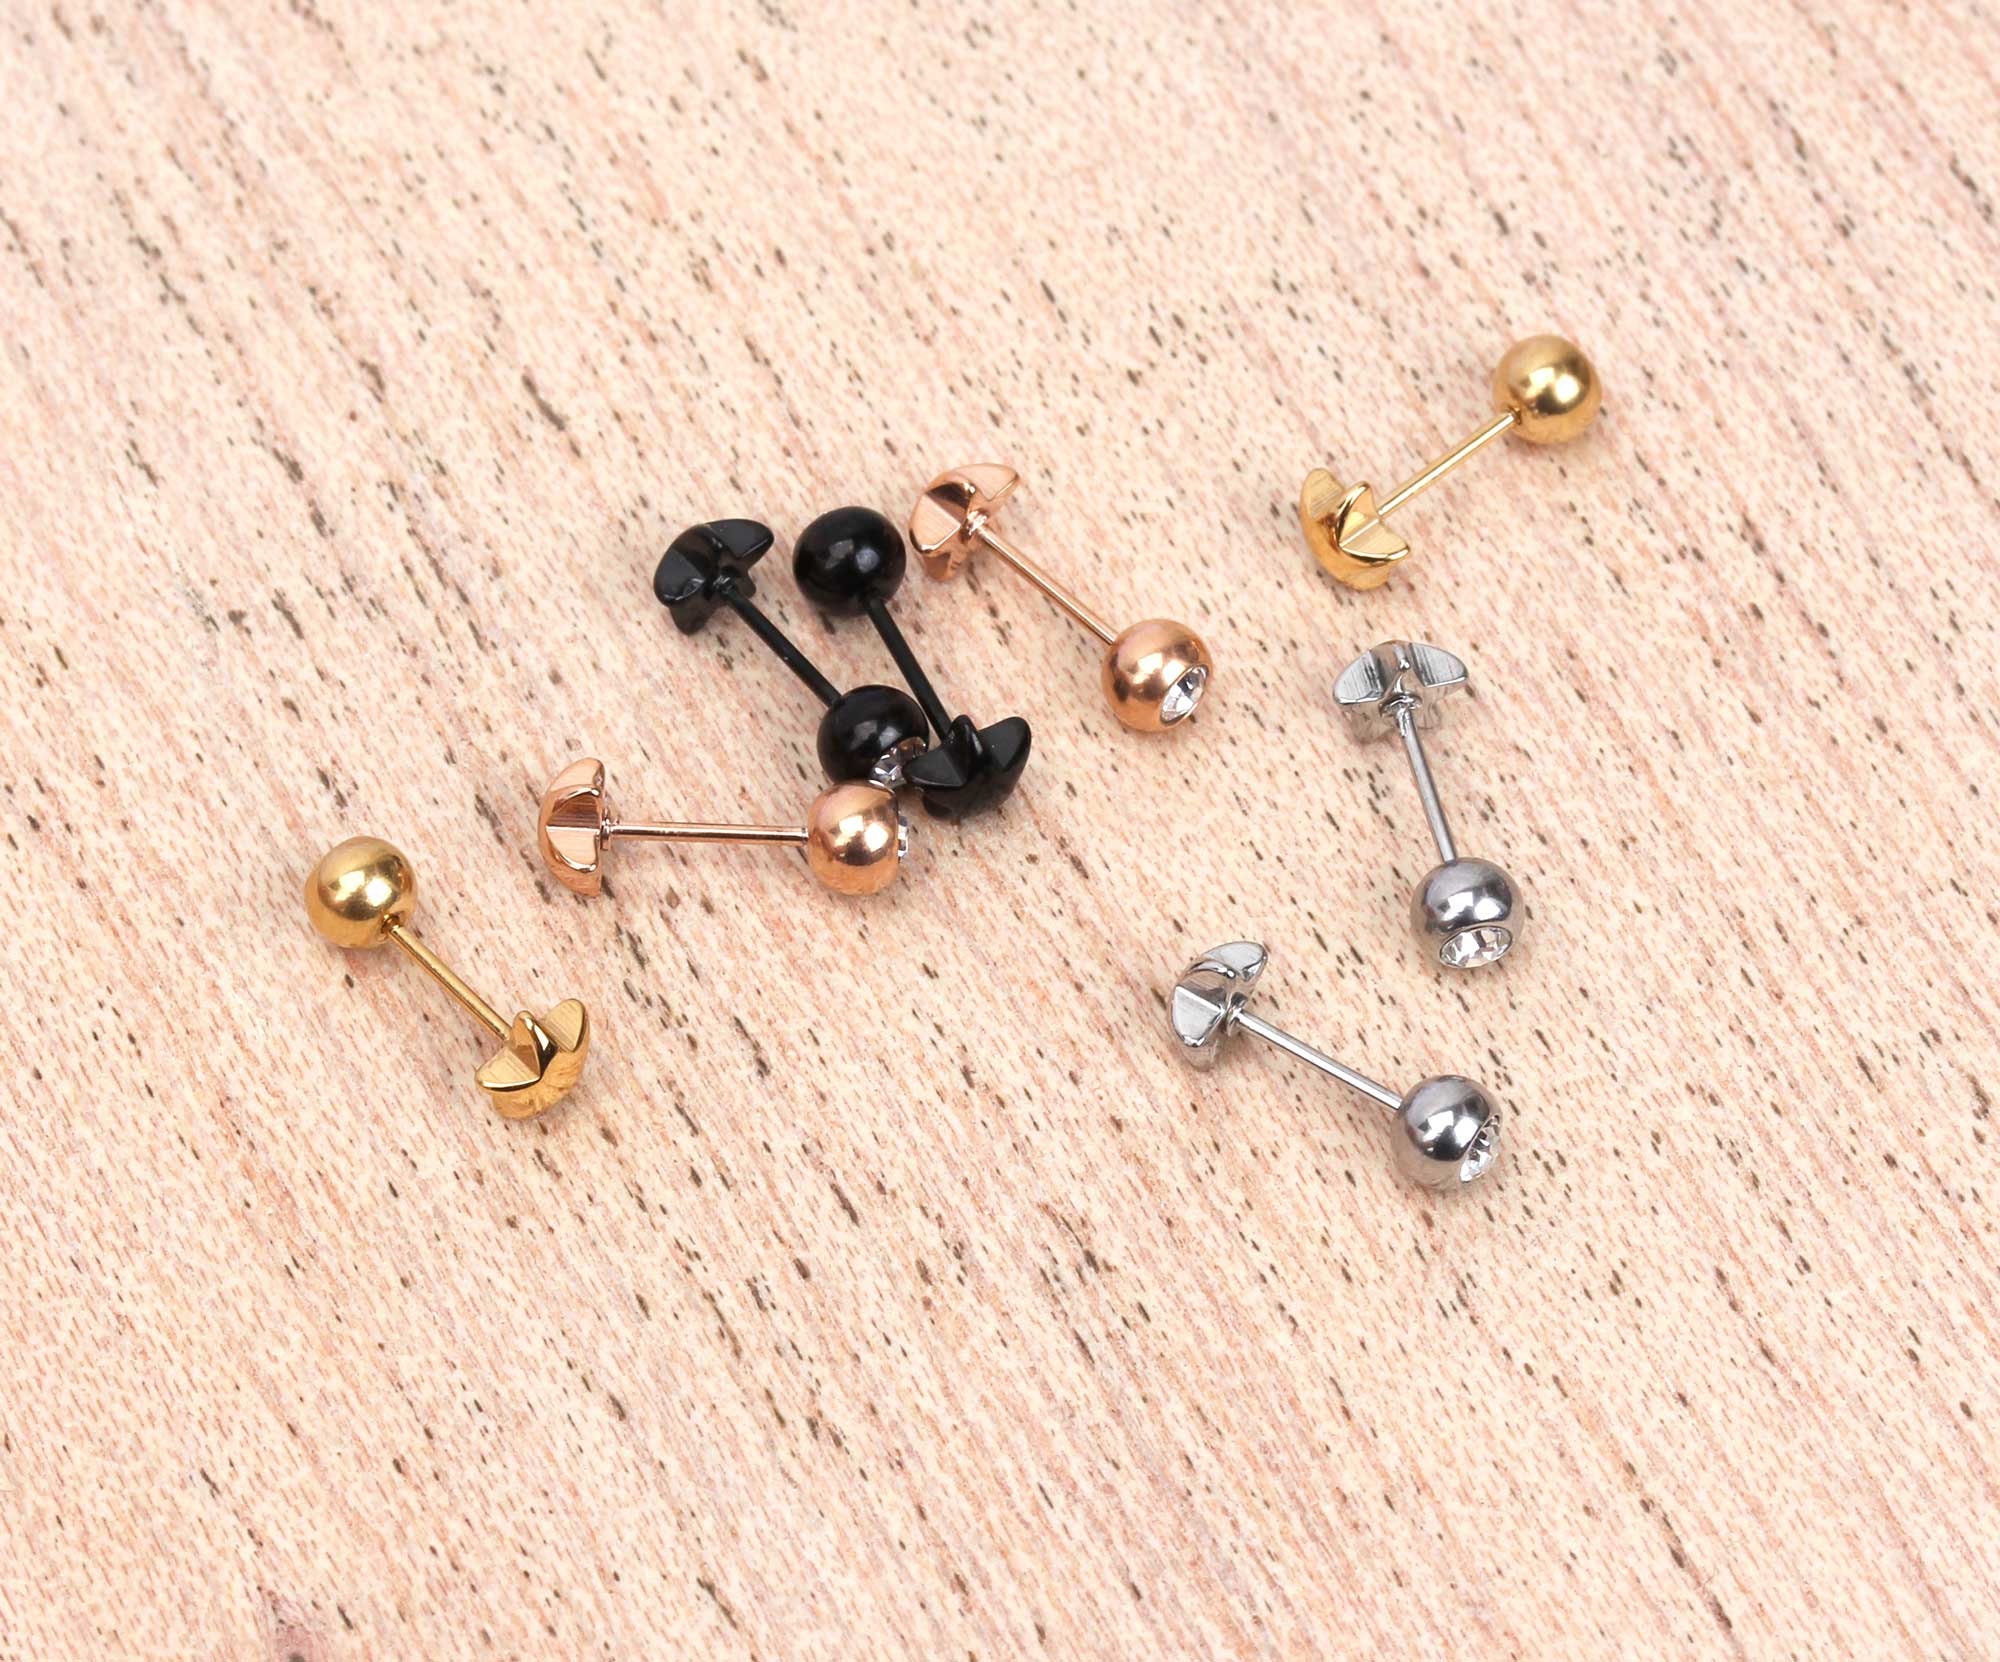 2-Pairs Screw Earring Backs,14K Gold Plated Sterling Silver Screw on  Earring Backs Replacements for Diamond Earring Studs, Hypoallergenic Secure  ScrewBacks for Threaded Post .032 